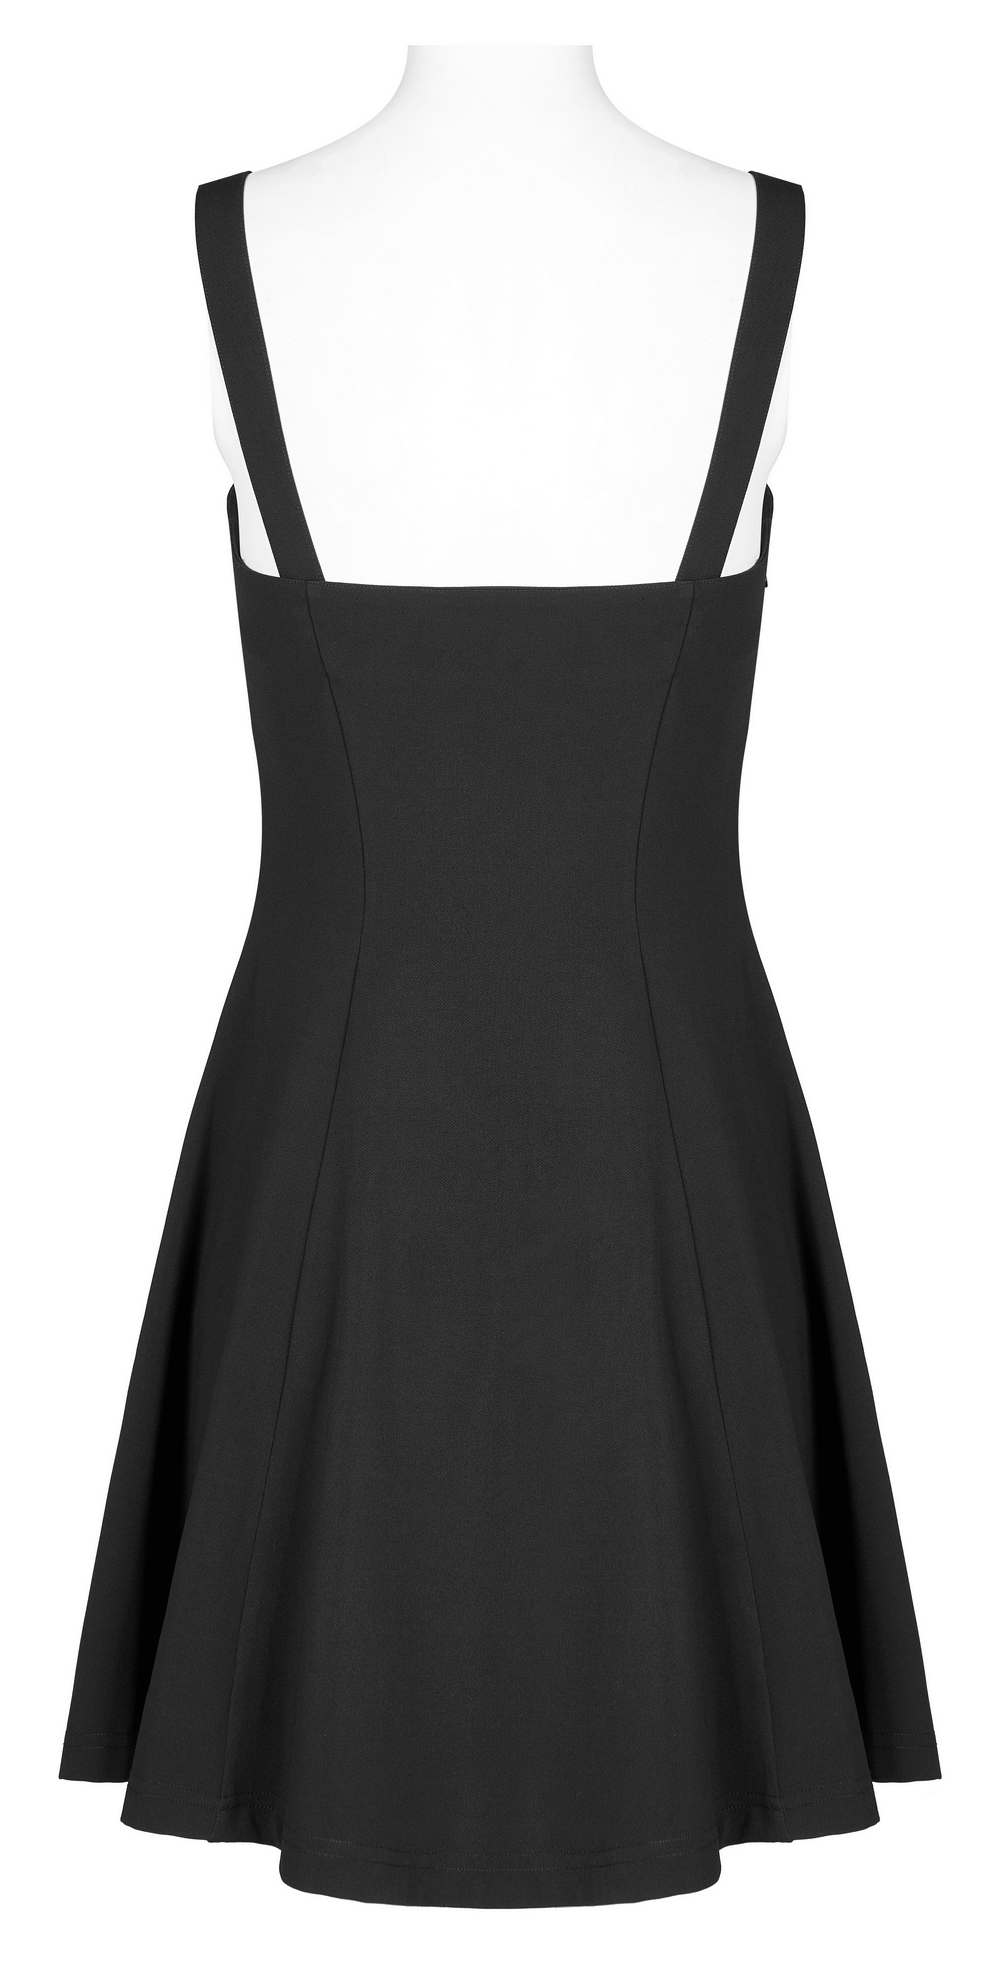 Sleek A-Line Skater Dress with Mesh and Metal Detail